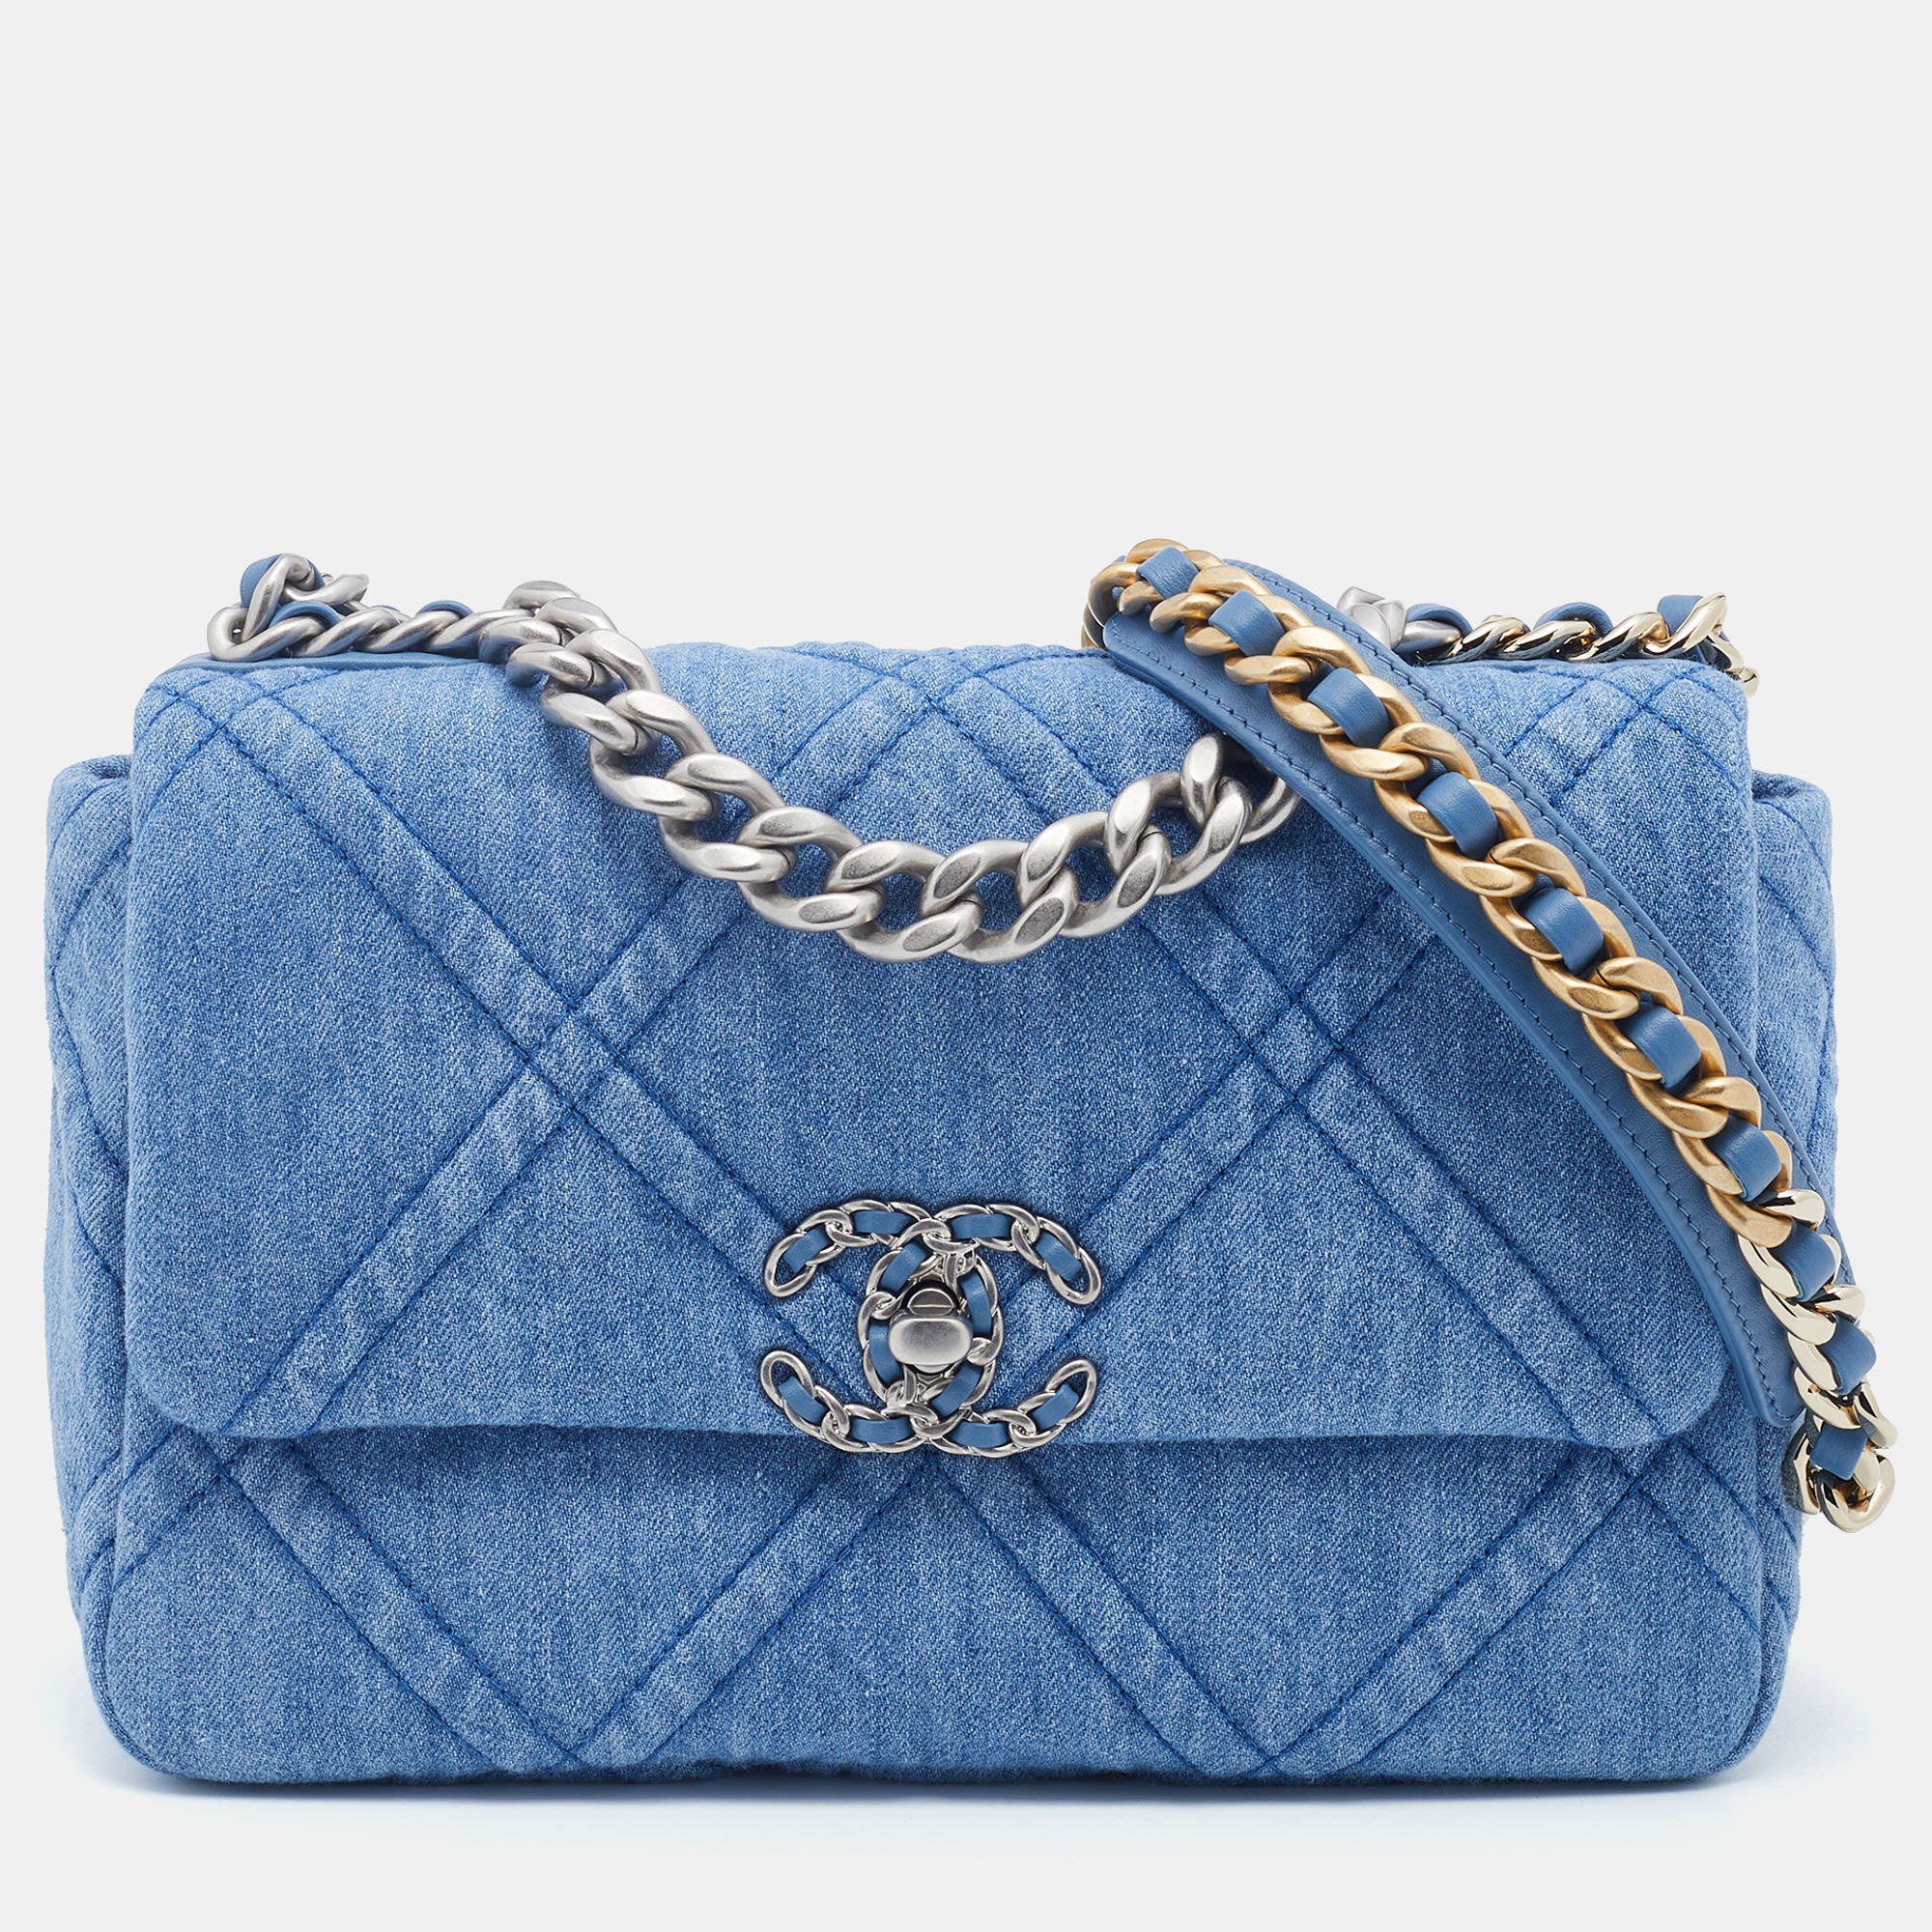 CHANEL Denim Quilted Large Chanel 19 Cosmetic Case Blue 663749